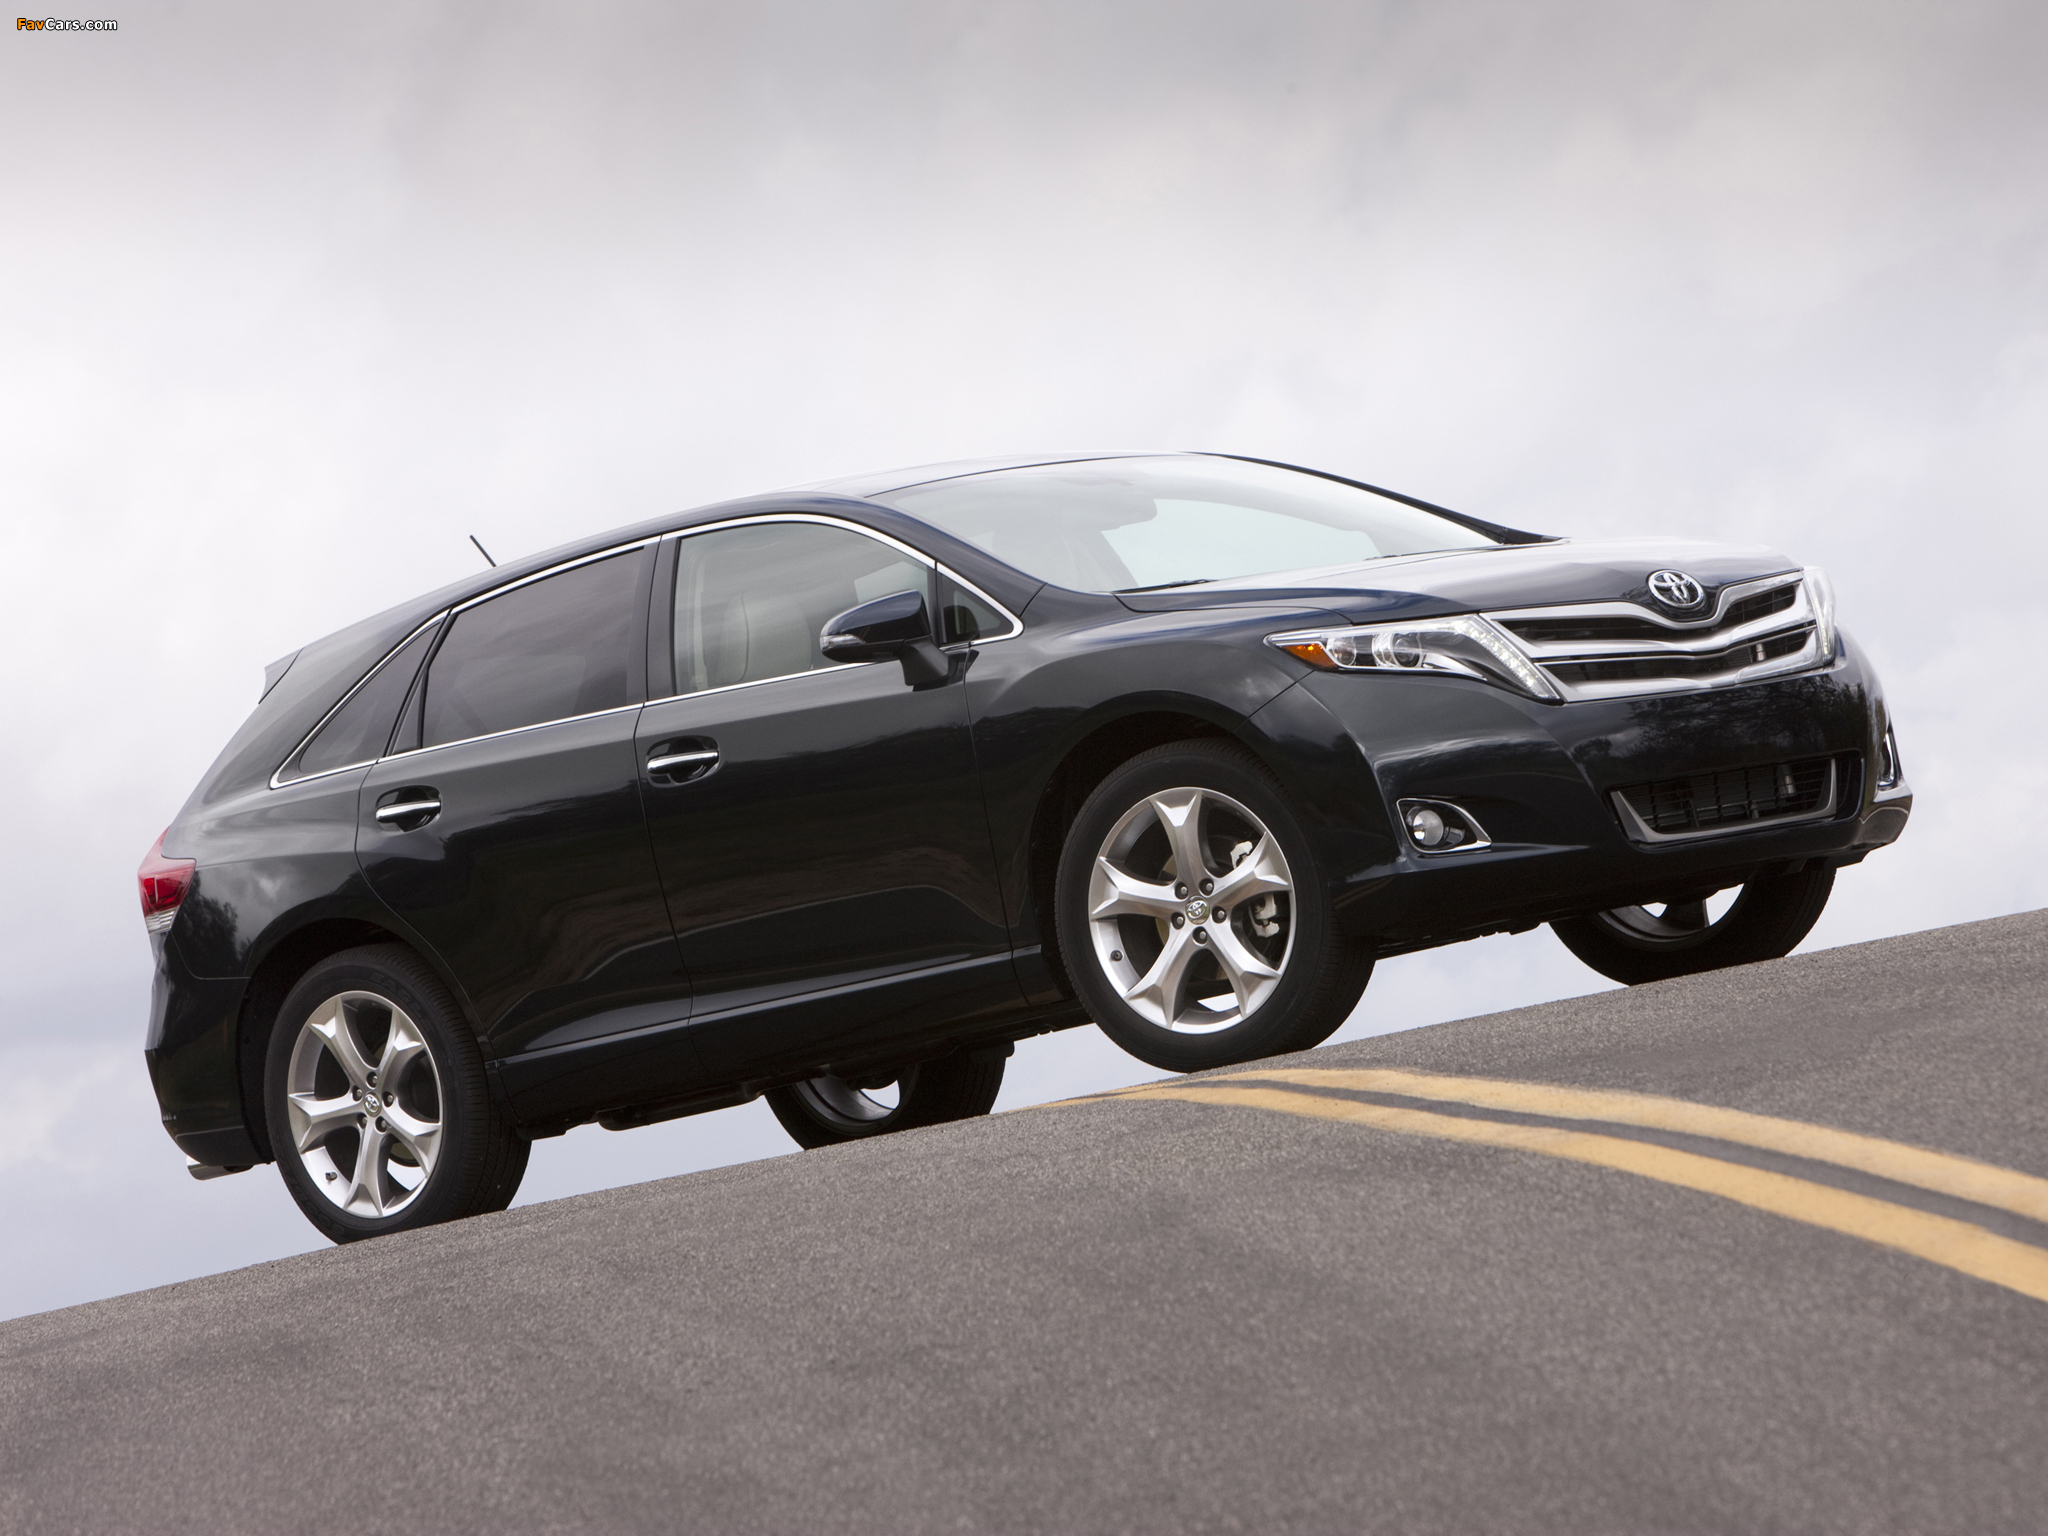 Toyota Venza 2012 images (2048 x 1536)